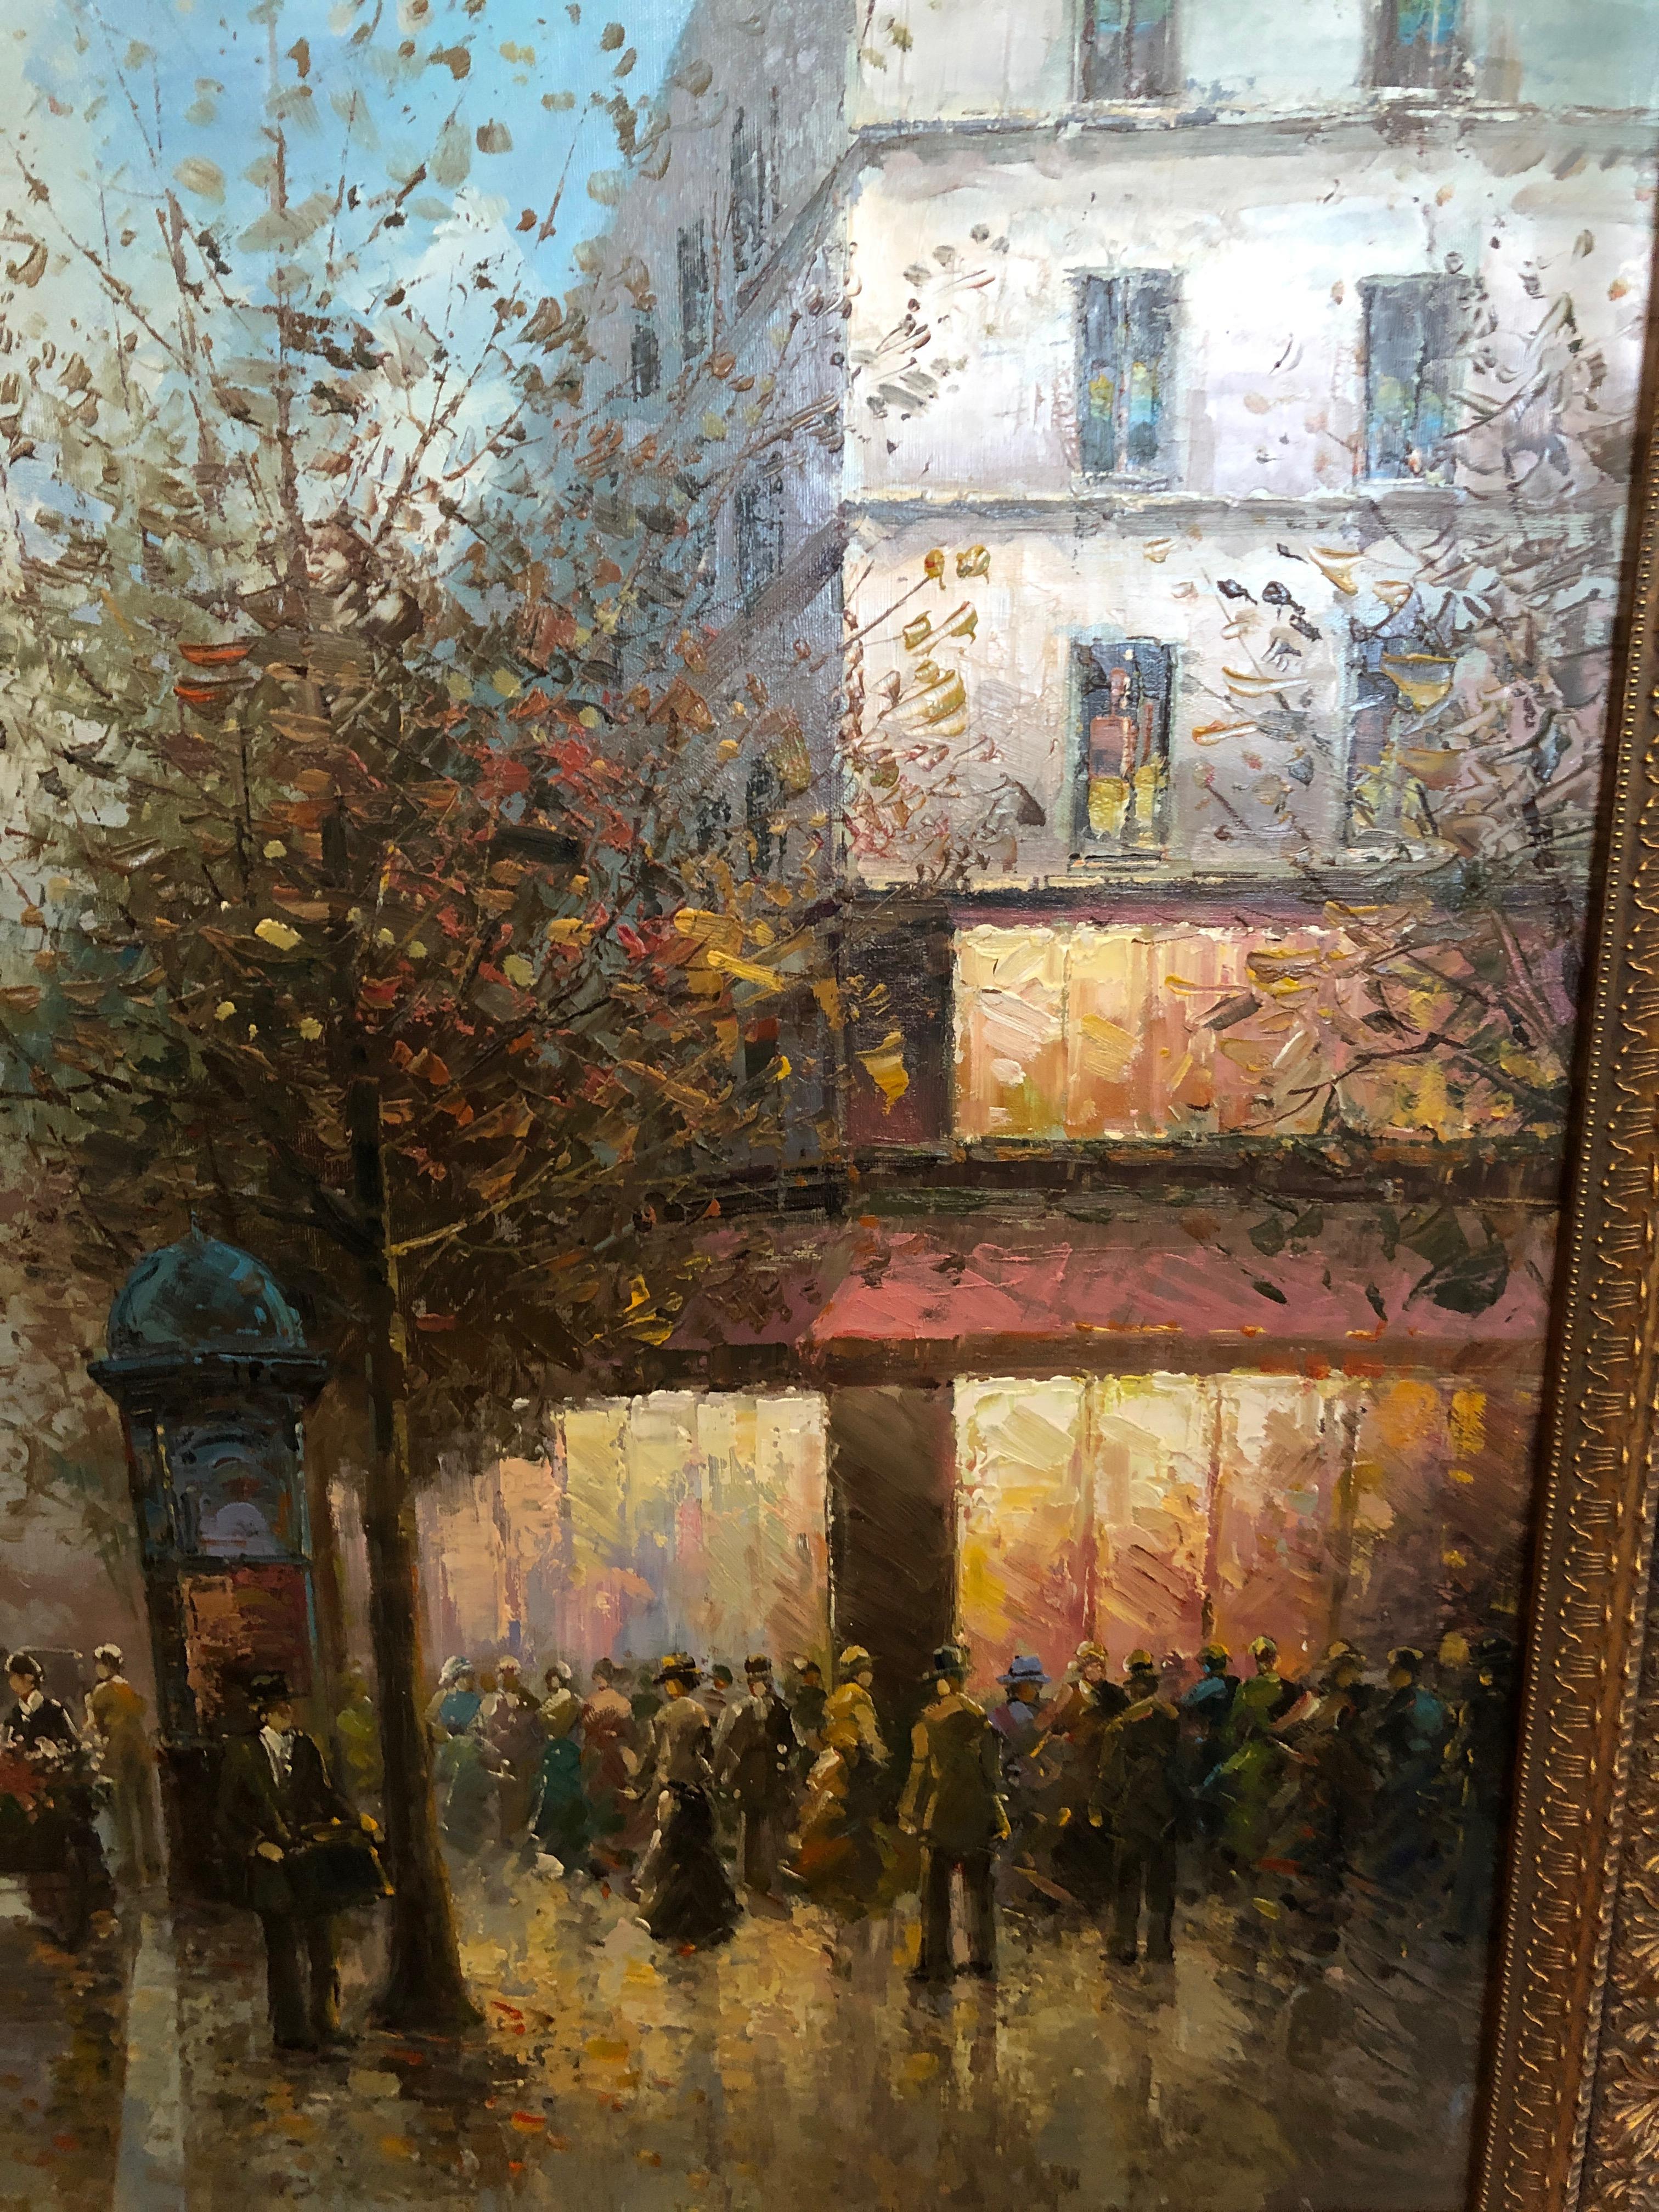 Wonderfully rendered impressionist style oil painting of a Paris street at the turn of the century with people meandering, a flower filled cart, horses, and gorgeous illuminated clouds and shop windows. By listed artist T. E. Pencke and signed lower